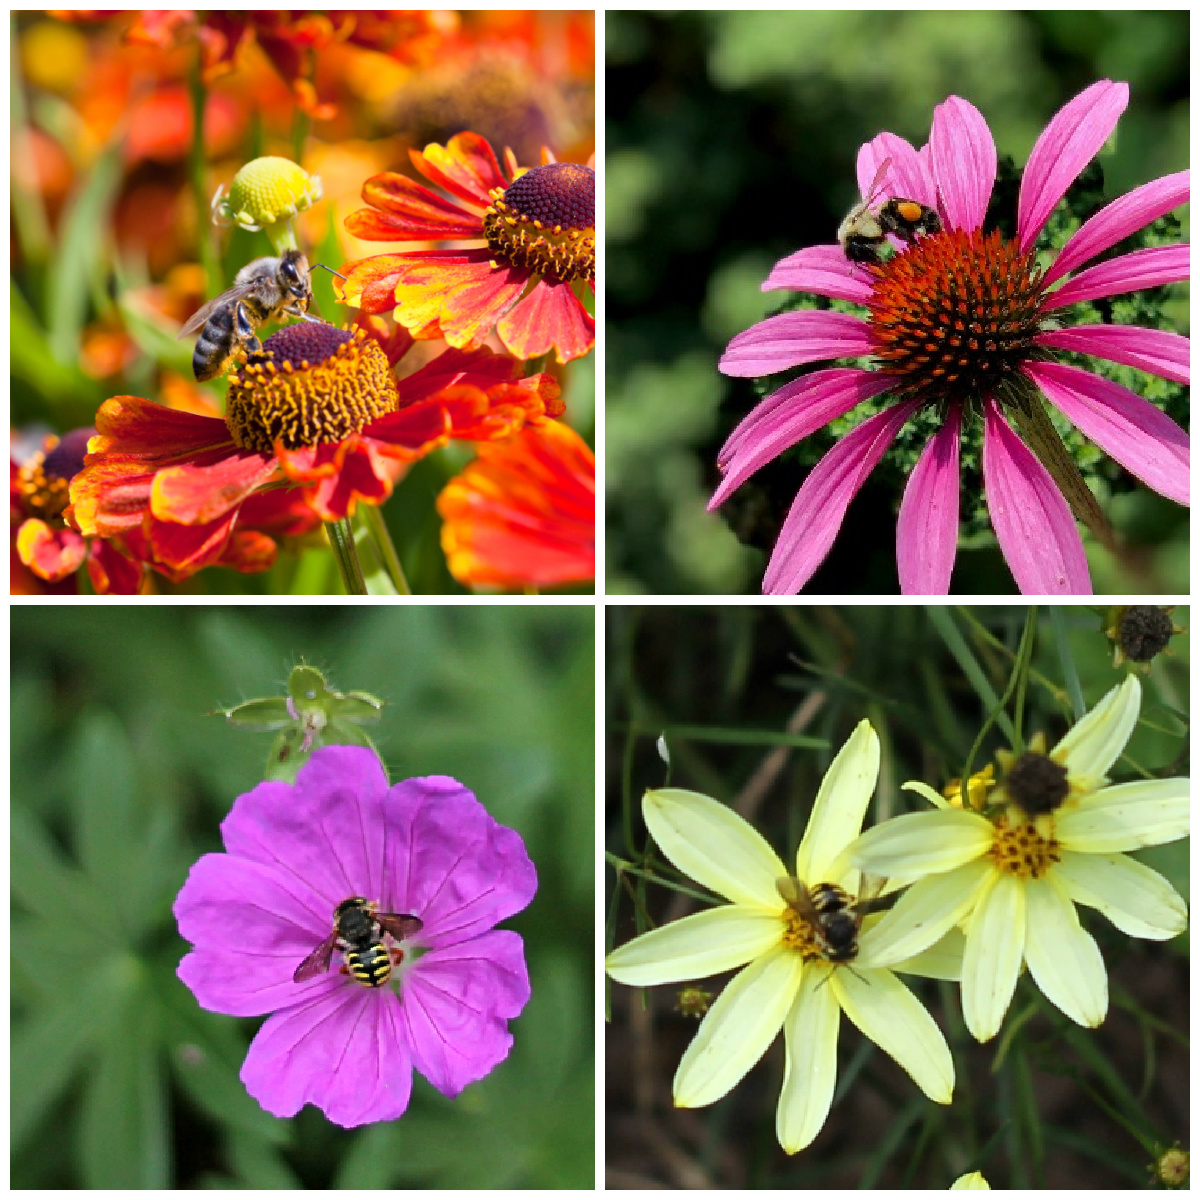 Collage of flowers with bees including blanket flower, coneflower, geranium and coreopsis.